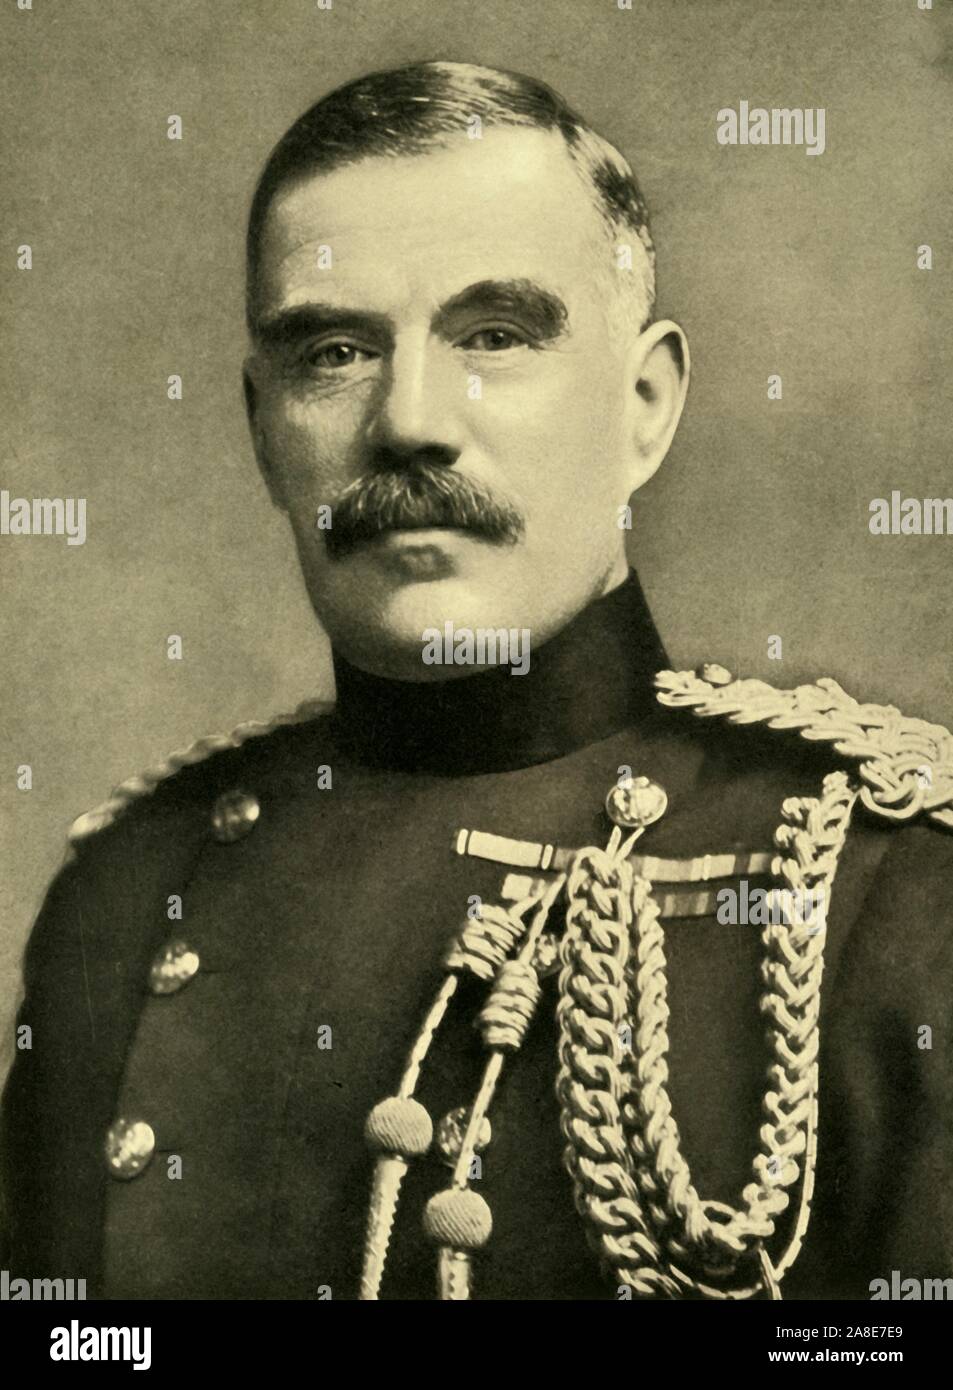 'General Sir William R. Robertson G.C.B., K.C.V.O', c1916, (c1920). Portrait of British soldier William Robert Robertson (1860-1933), general and later field marshal. Robertson was Chief of the Imperial General Staff during the First World War, 1916-1918. From &quot;The Great World War: A History&quot;, Volume VI, edited by Frank A Mumby. [The Gresham Publishing Company Ltd, London, c1920] Stock Photo